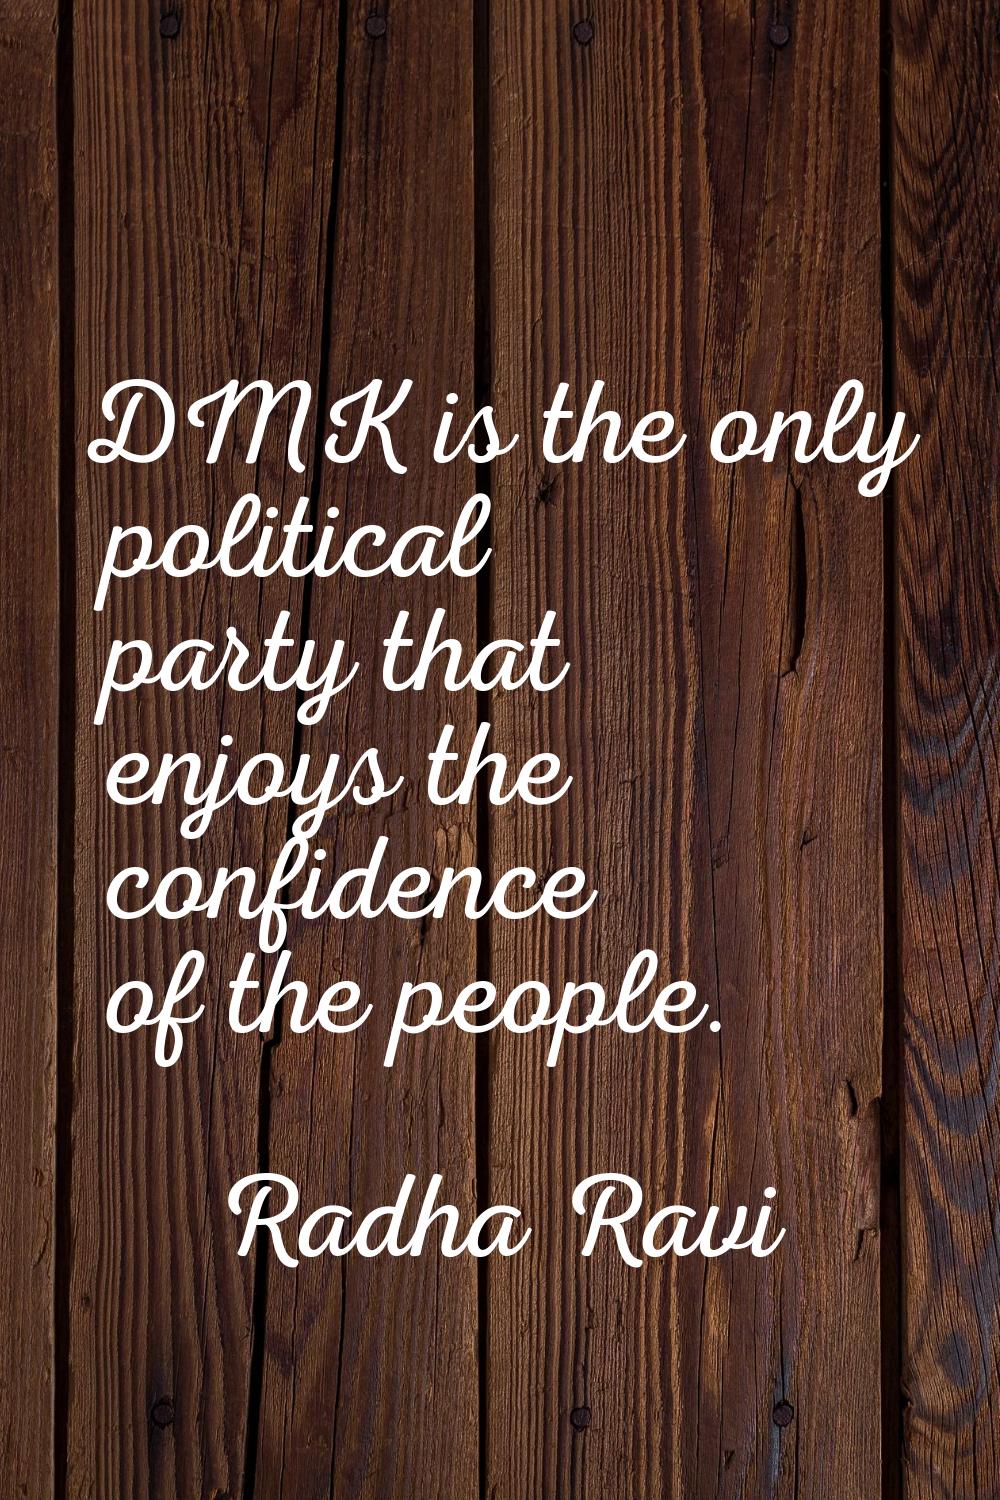 DMK is the only political party that enjoys the confidence of the people.